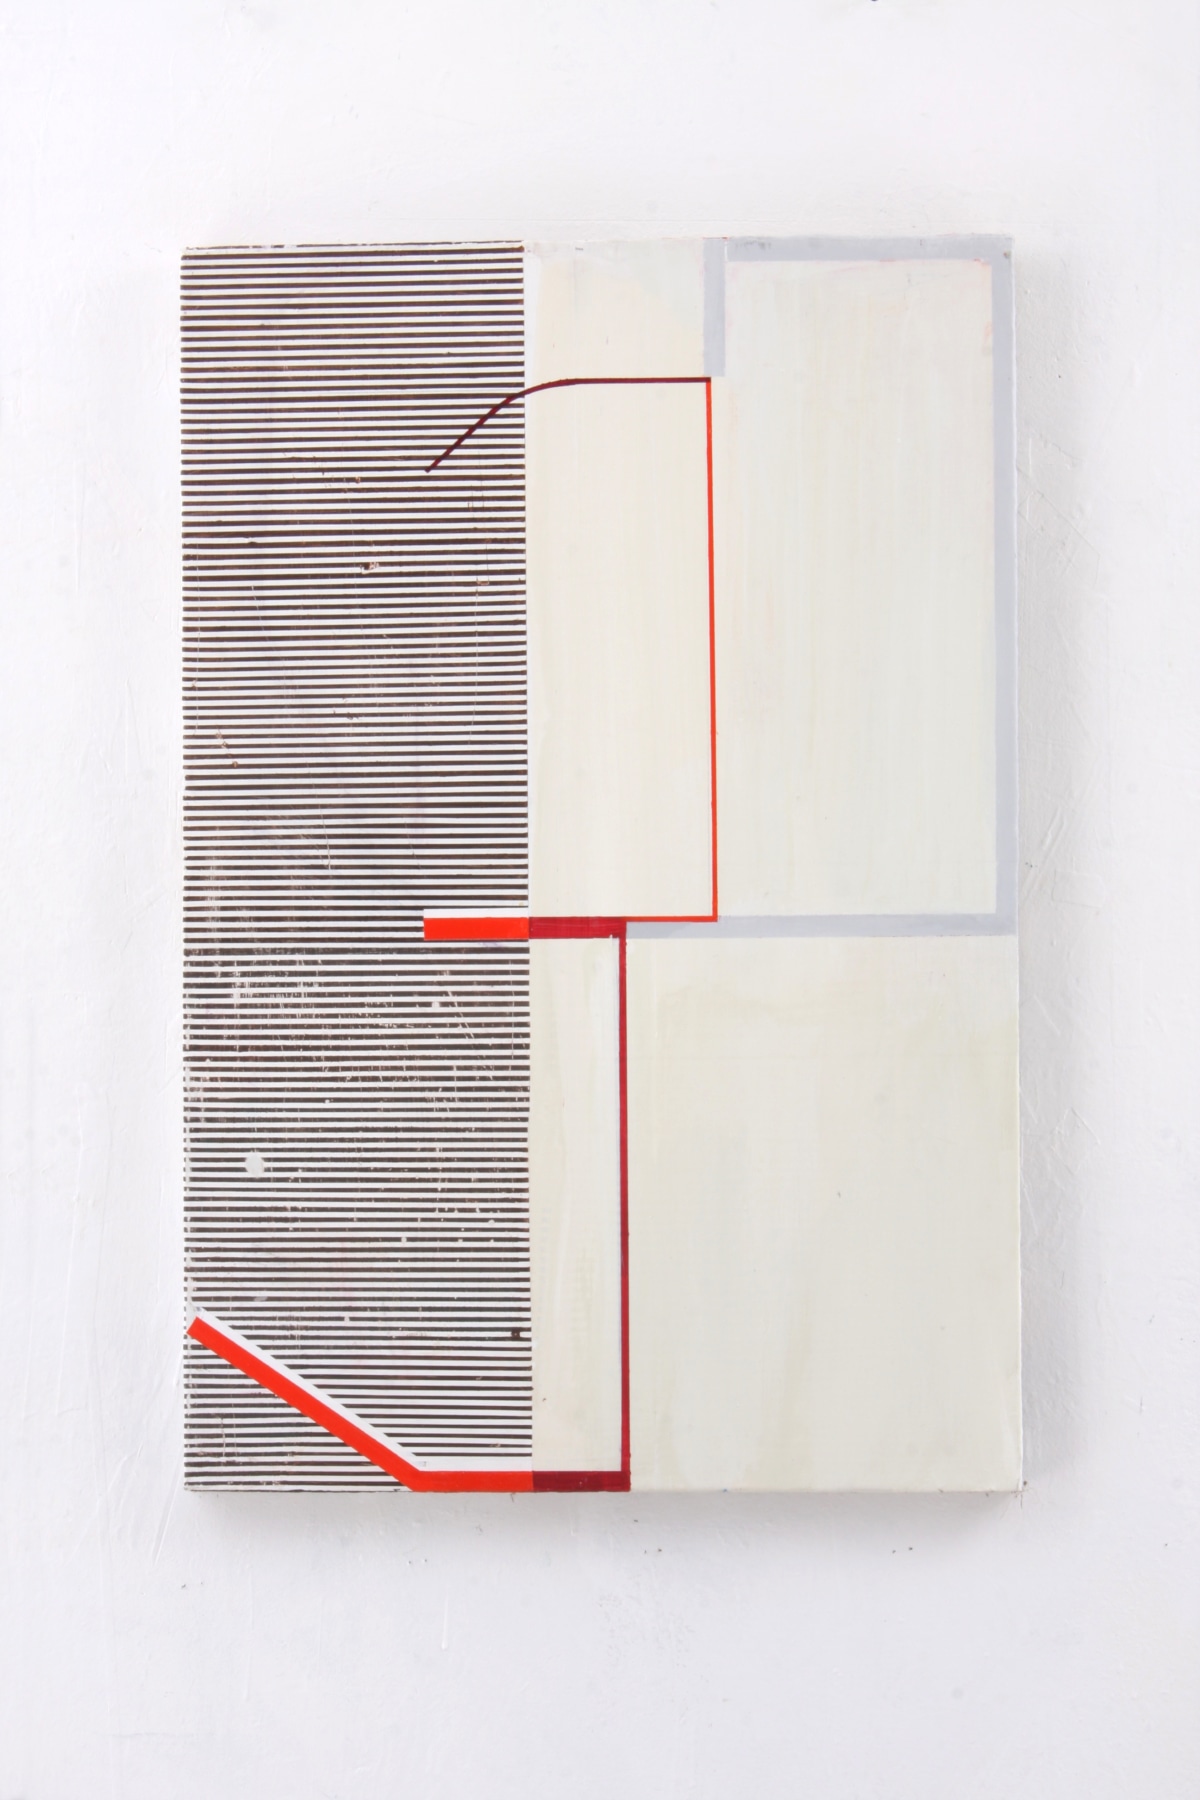 Gordon Moore, Catawall, 2018, Acrylic, latex, and pumice on canvas, 30&quot; x 20&quot; at Anita Rogers Gallery